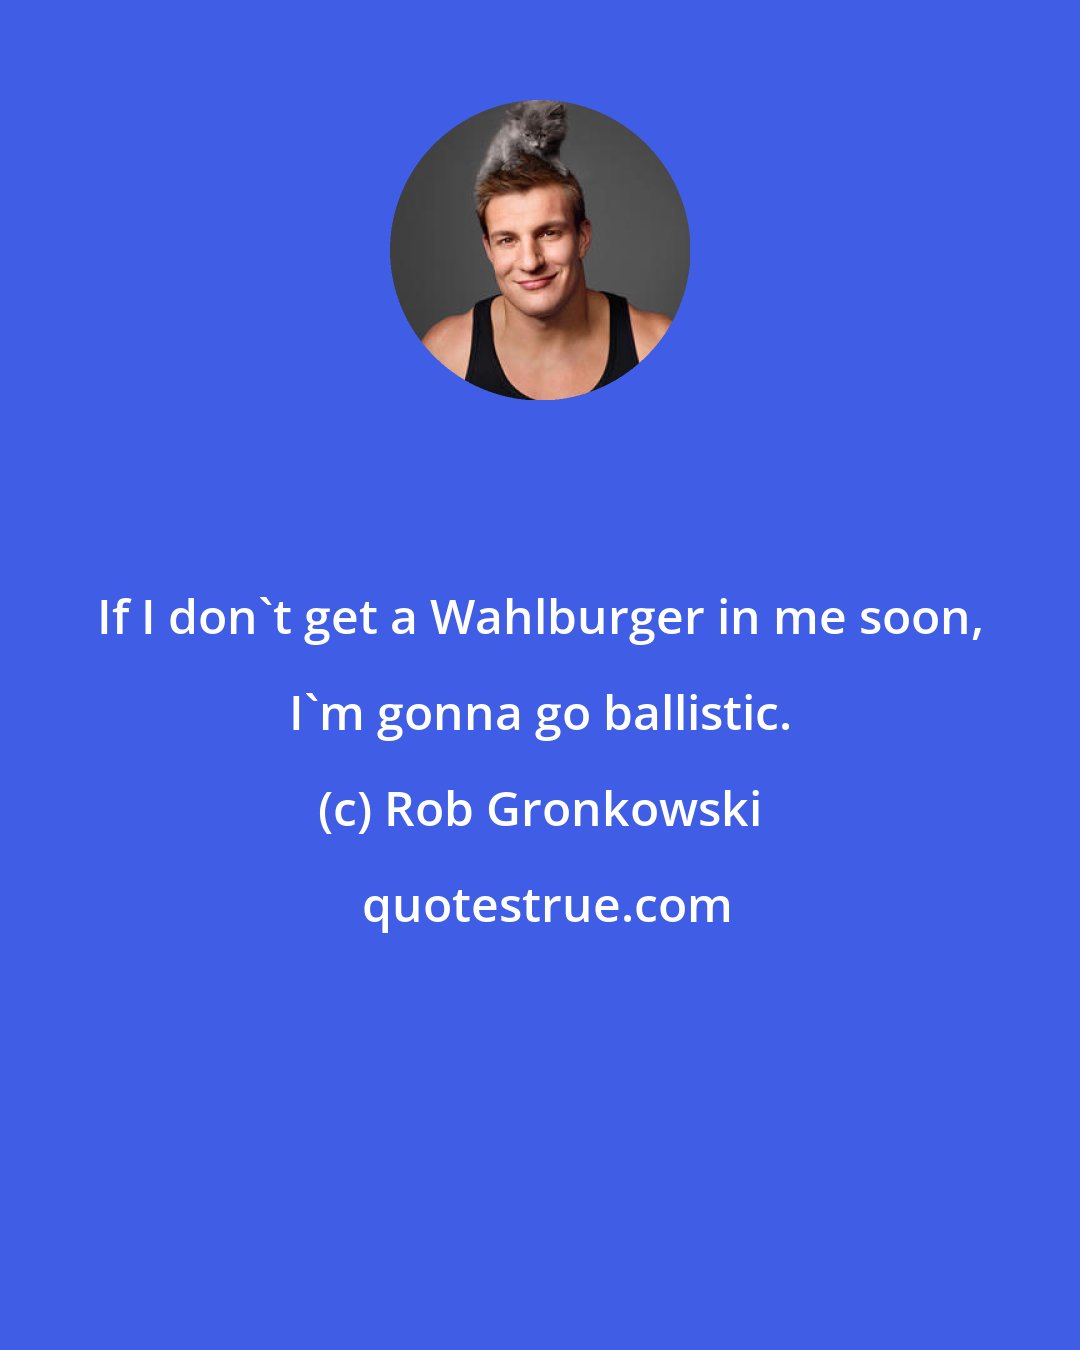 Rob Gronkowski: If I don't get a Wahlburger in me soon, I'm gonna go ballistic.